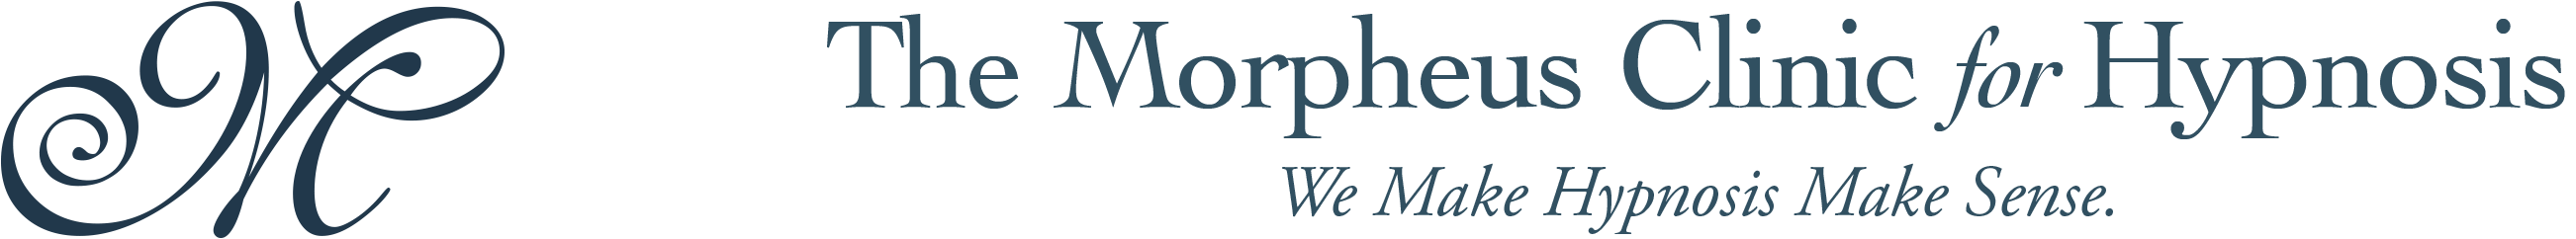 The Morpheus Clinic for Hypnosis